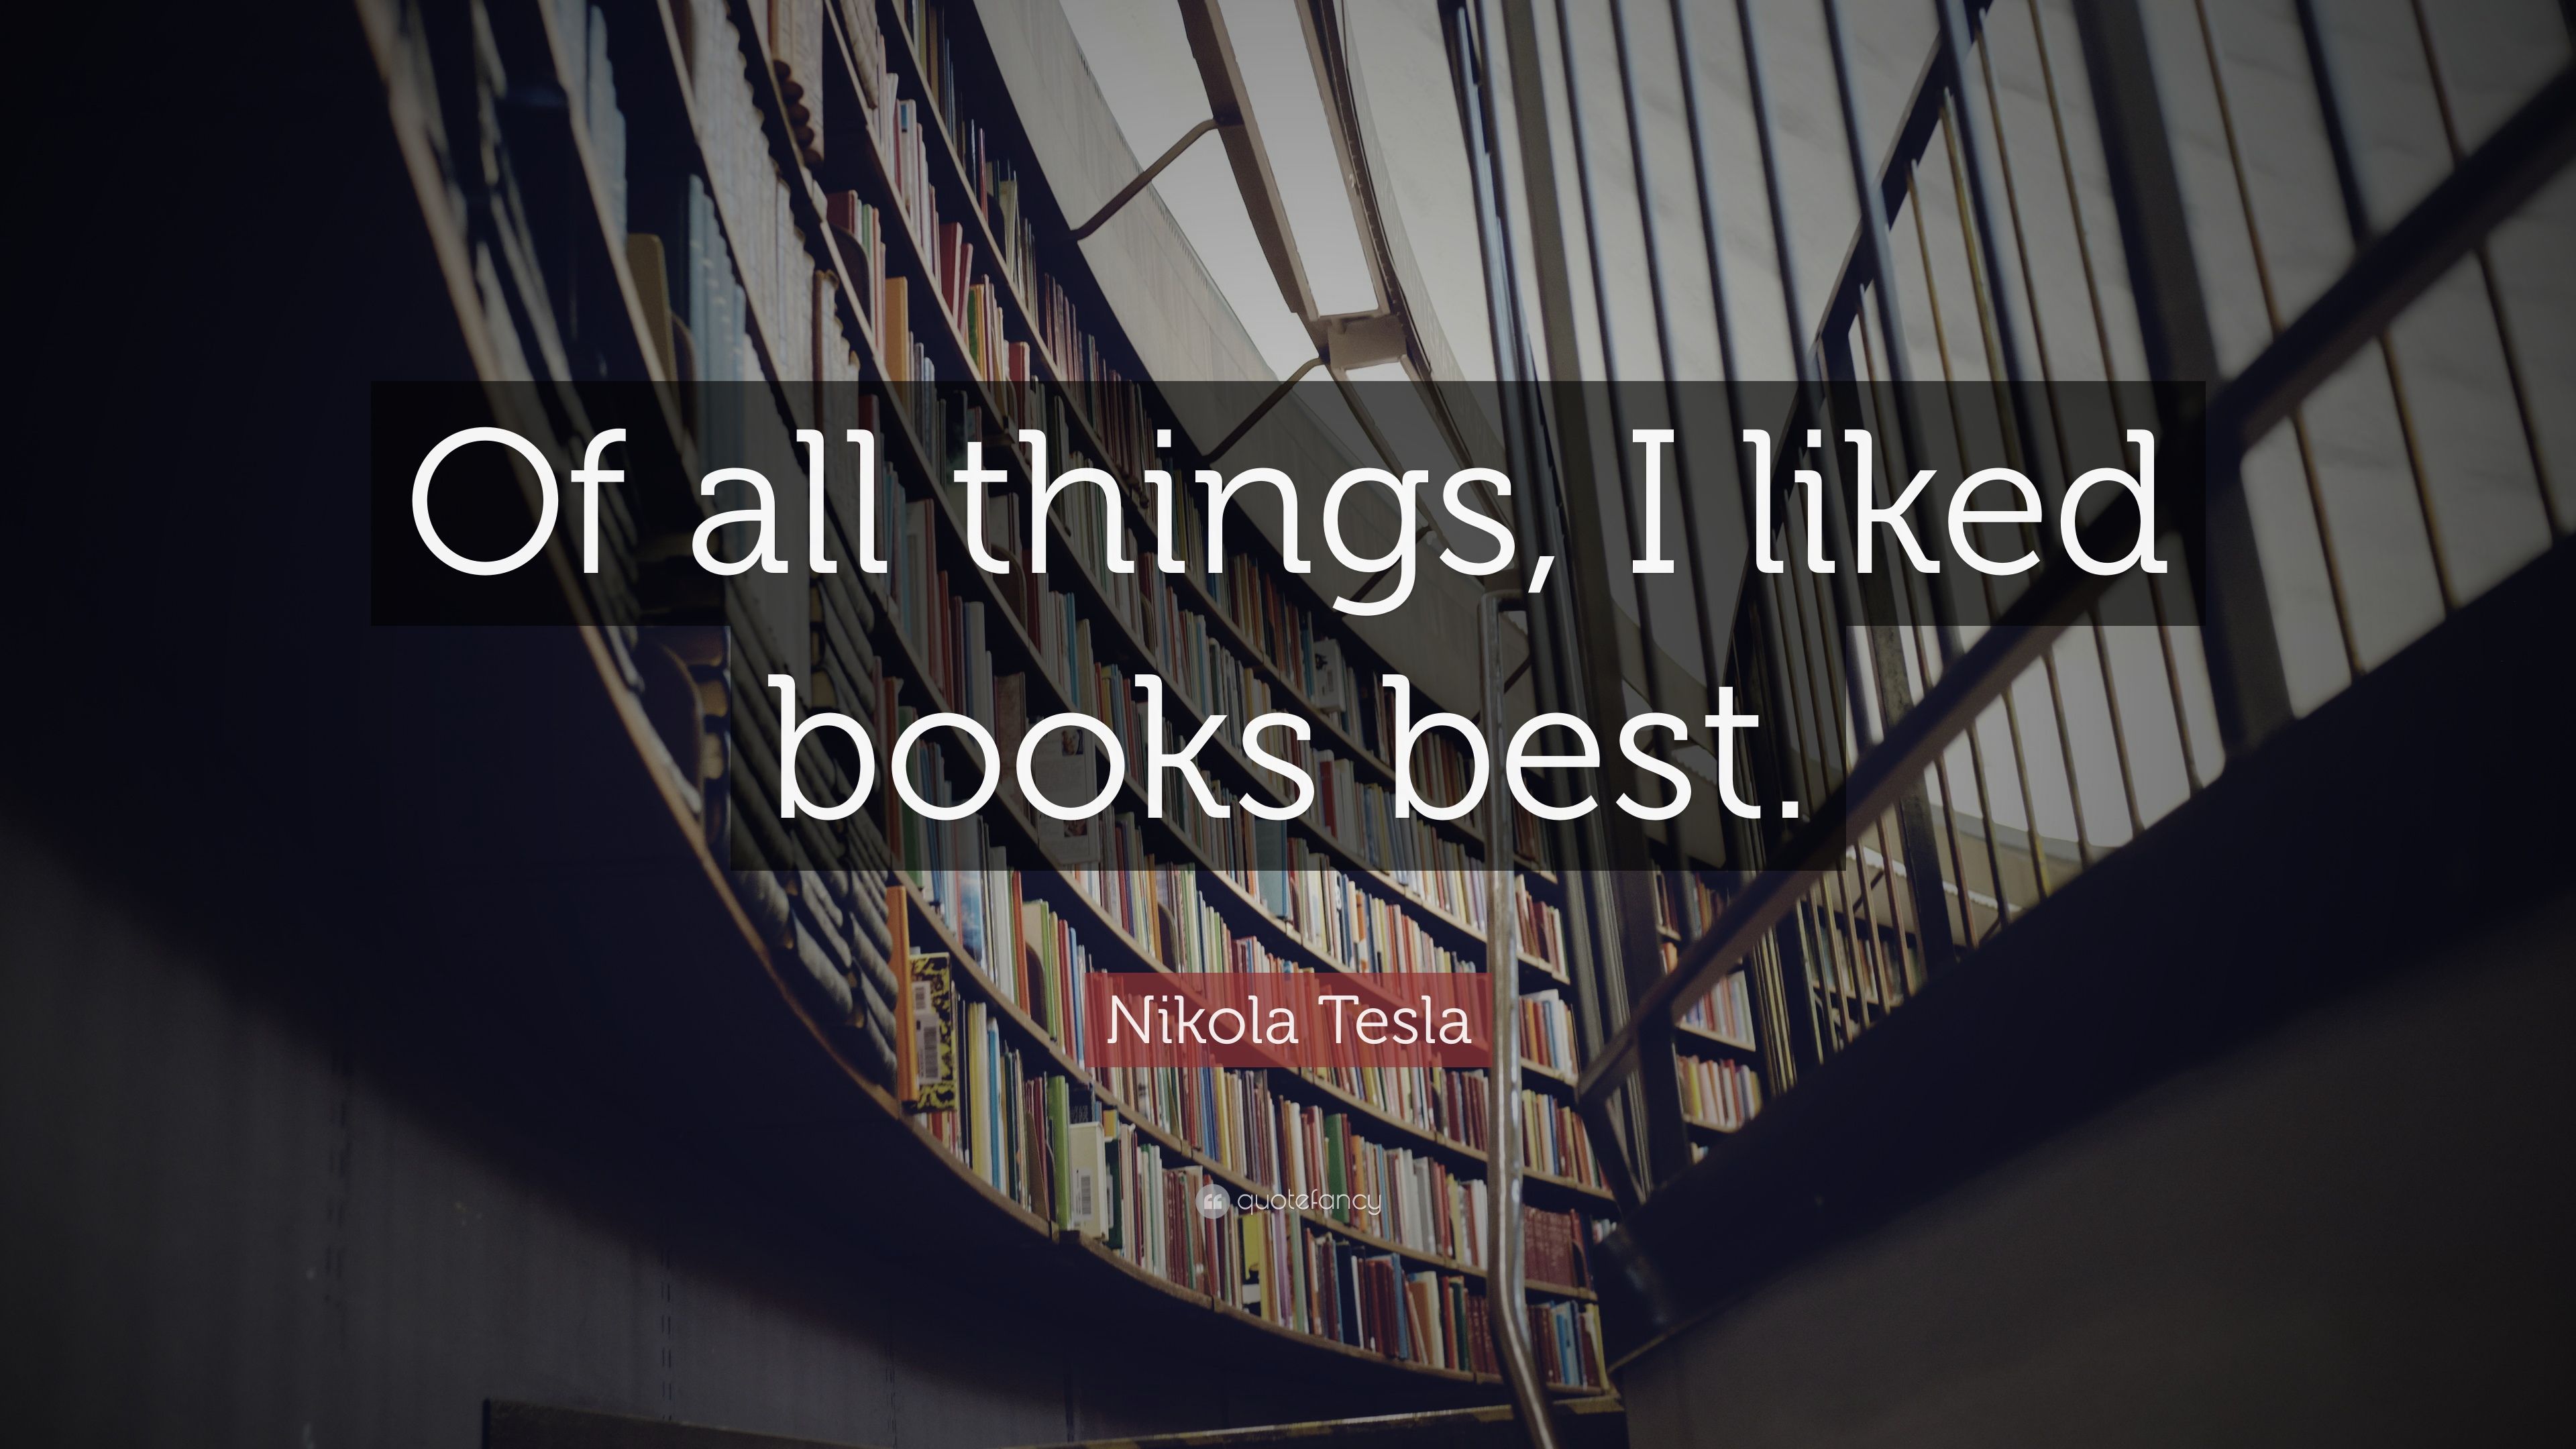 Nikola Tesla Quote: “Of all things, I liked books best.” (3 ...